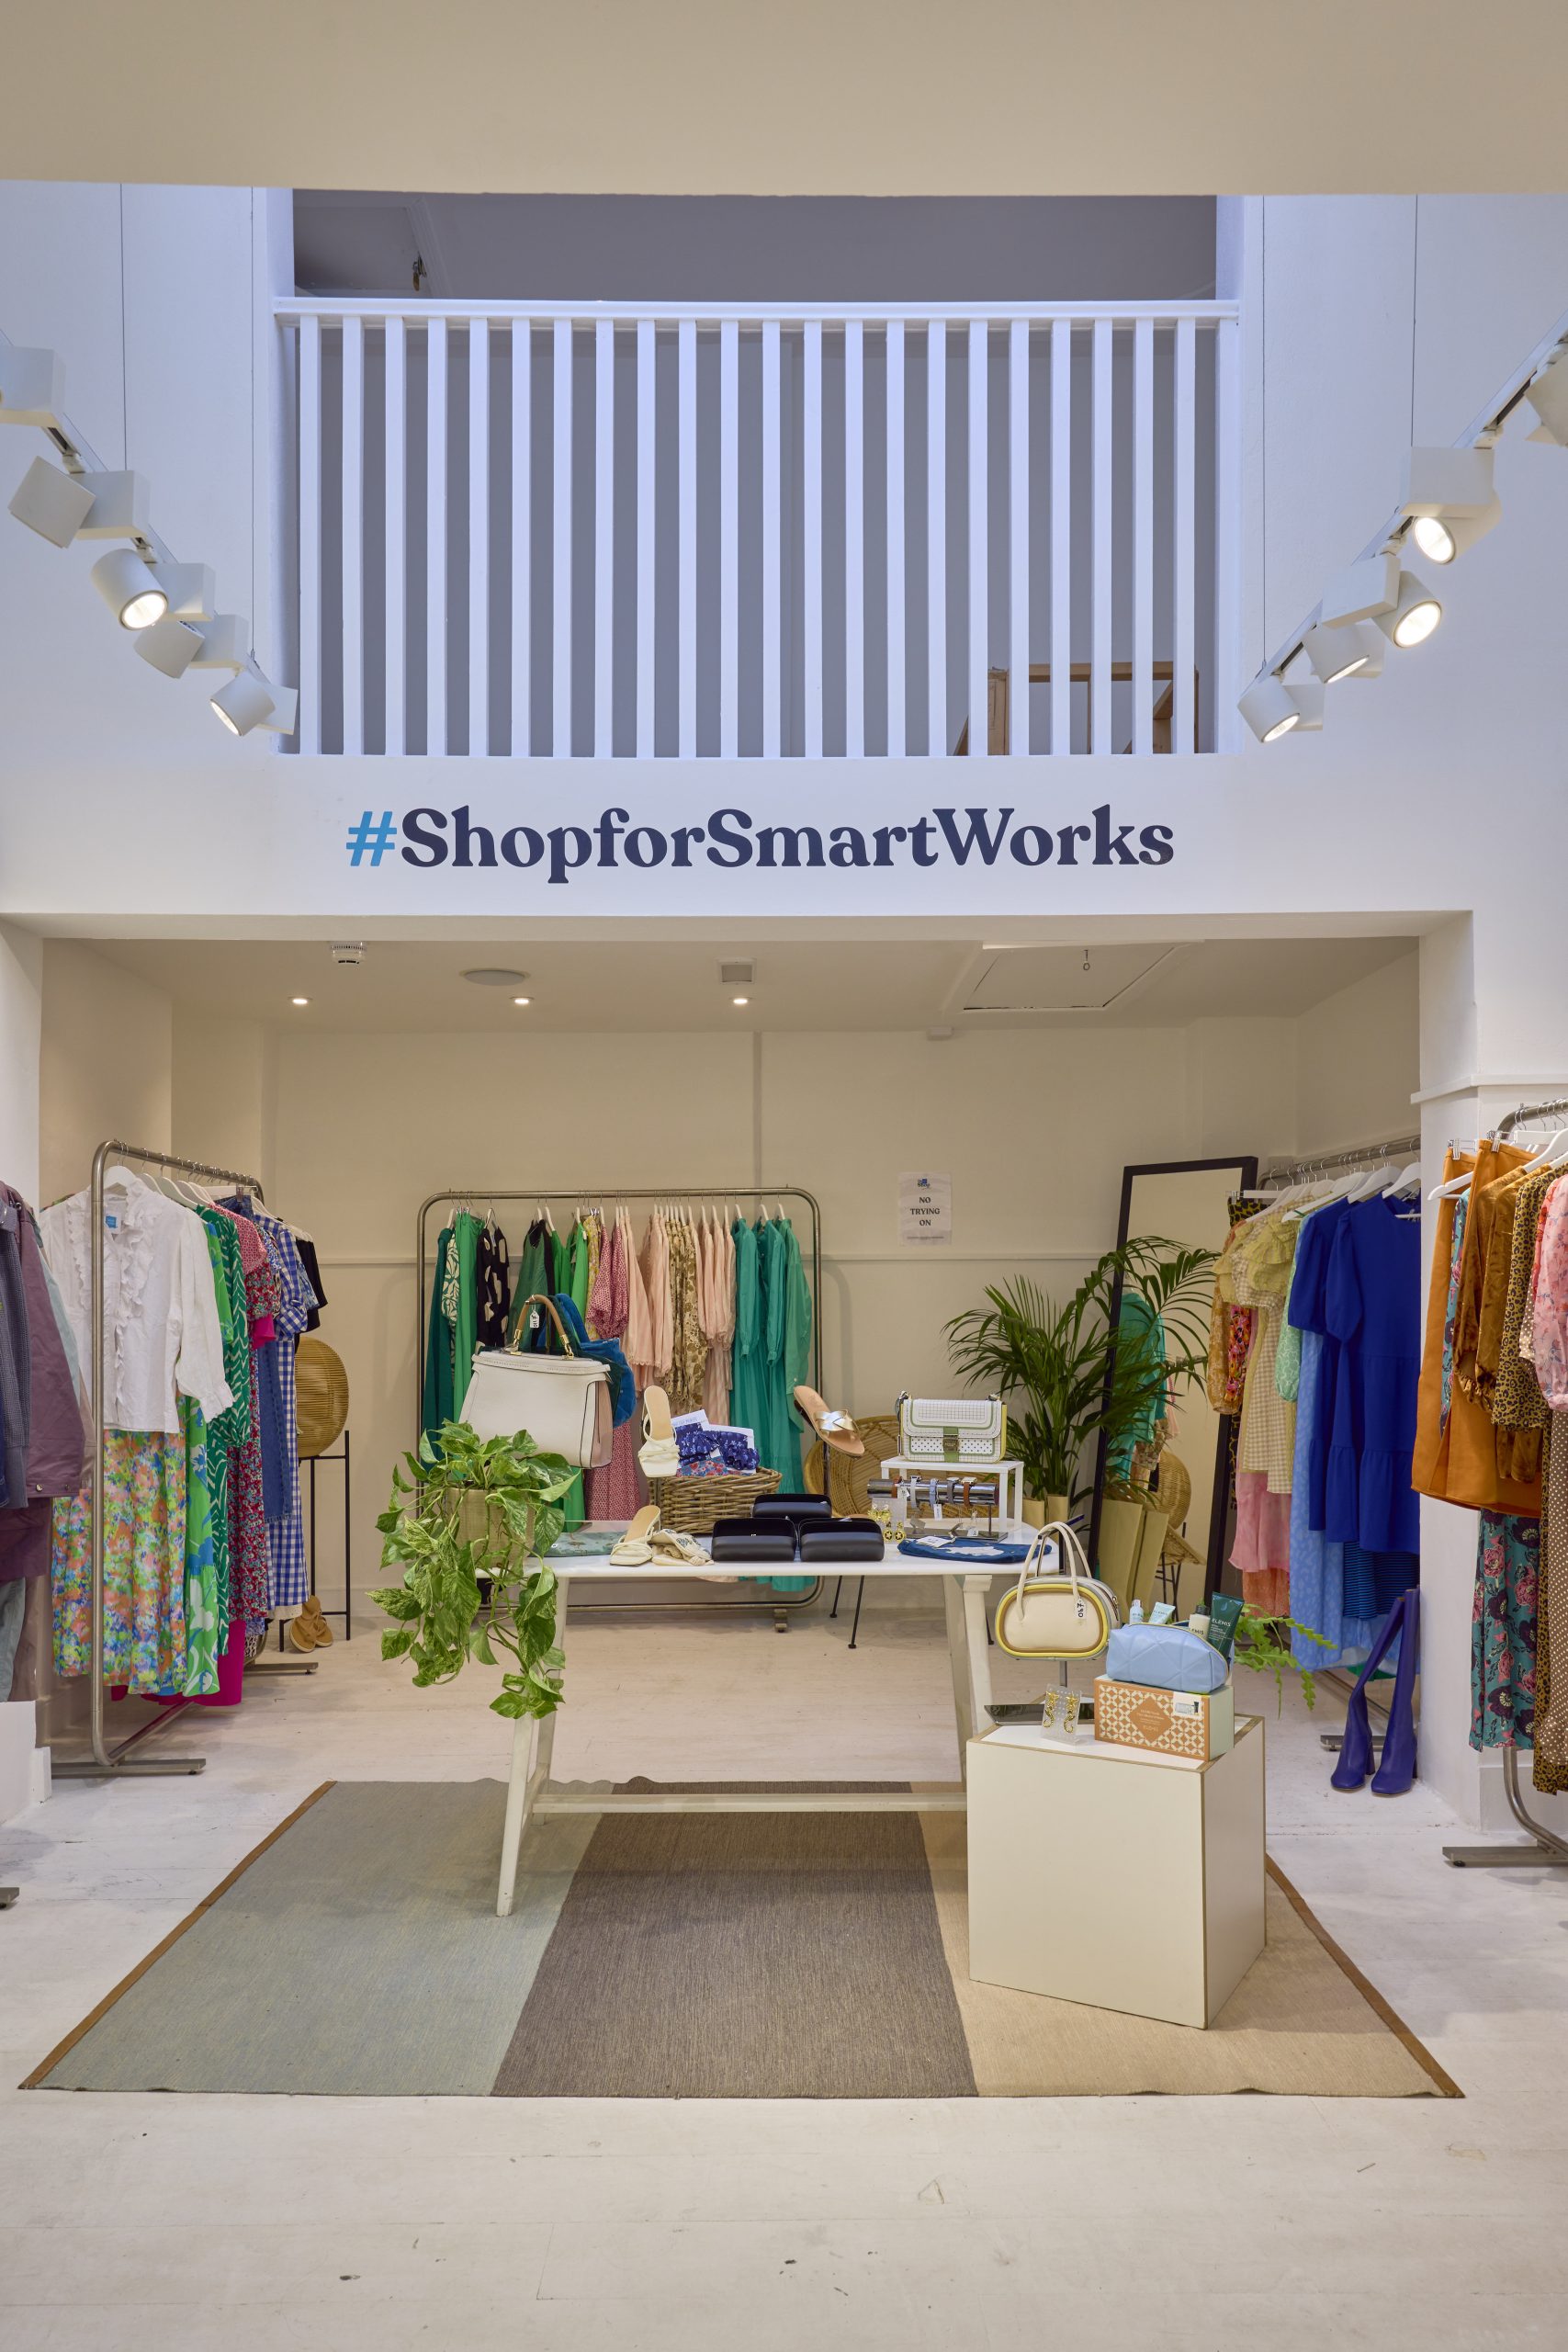 Join the Fashion Club - Smart Works